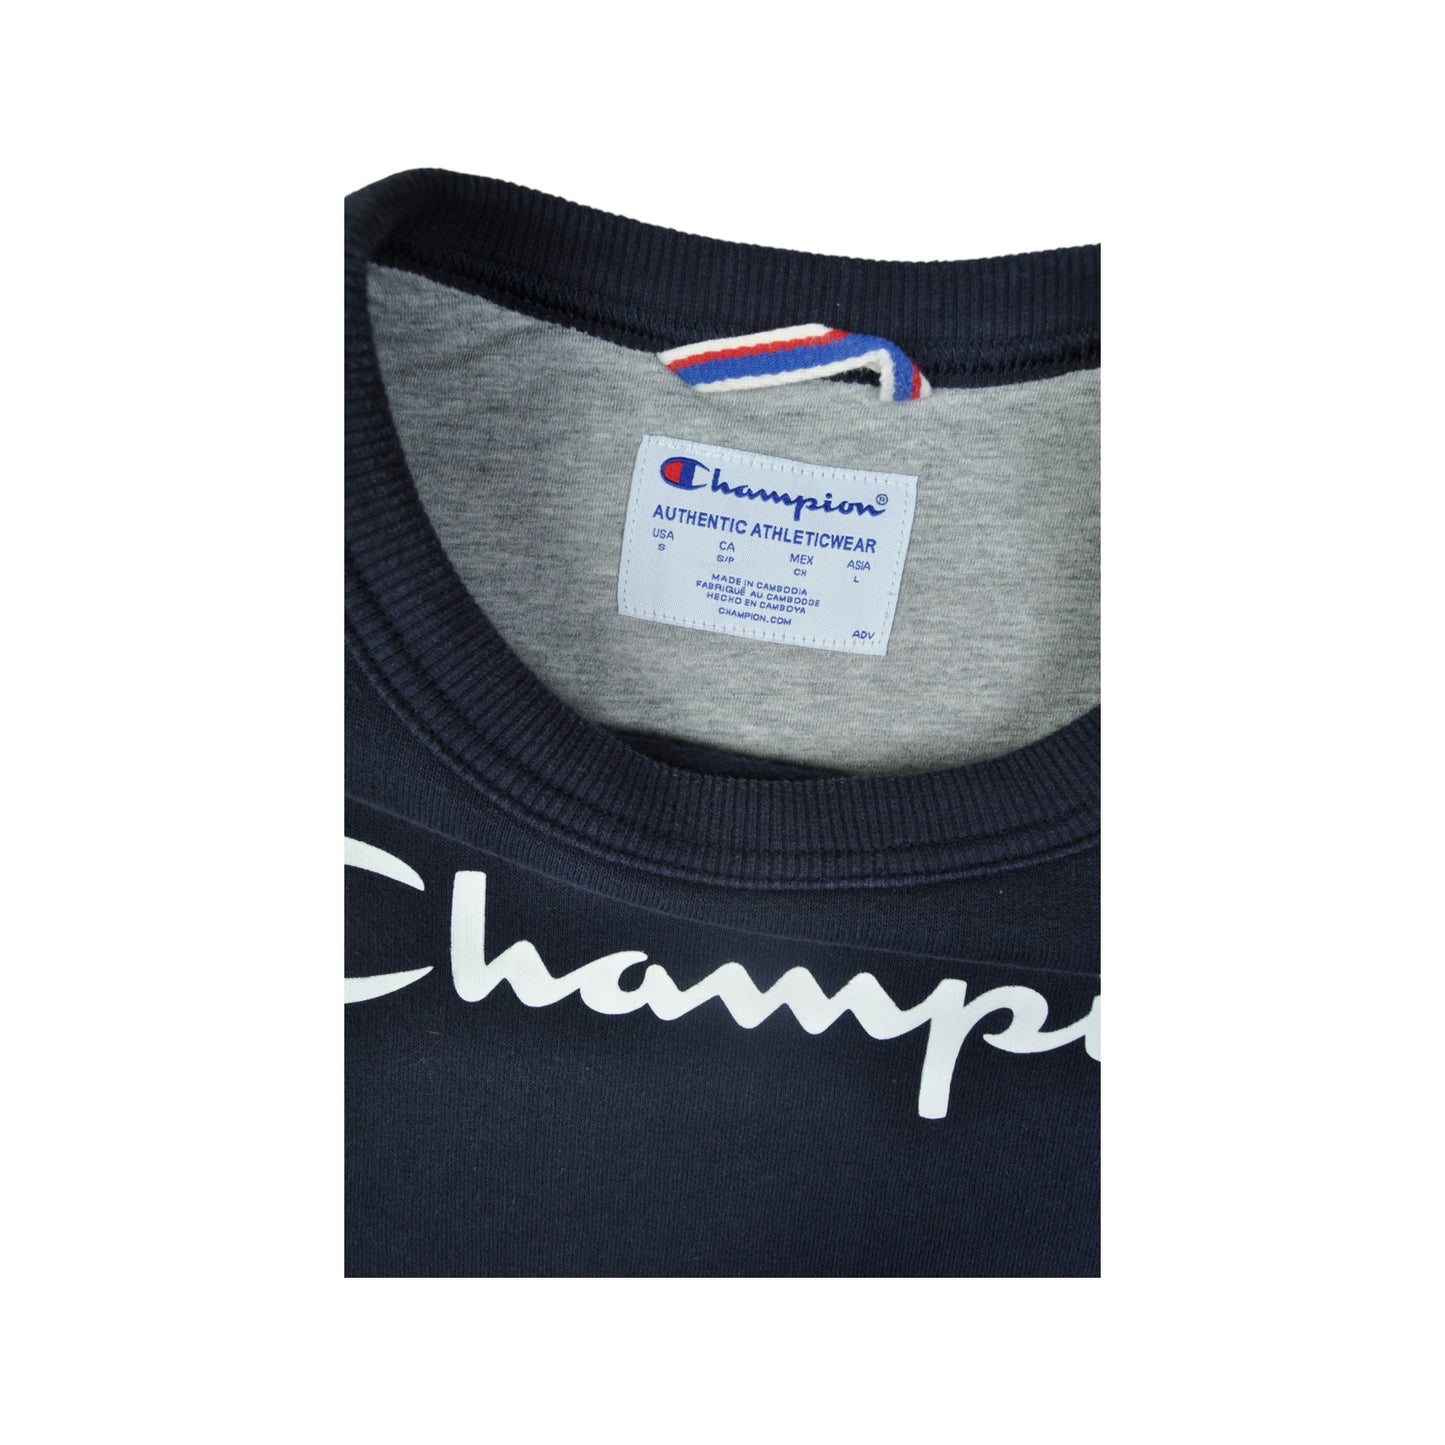 Vintage Champion Spell Out Sweater Navy Small